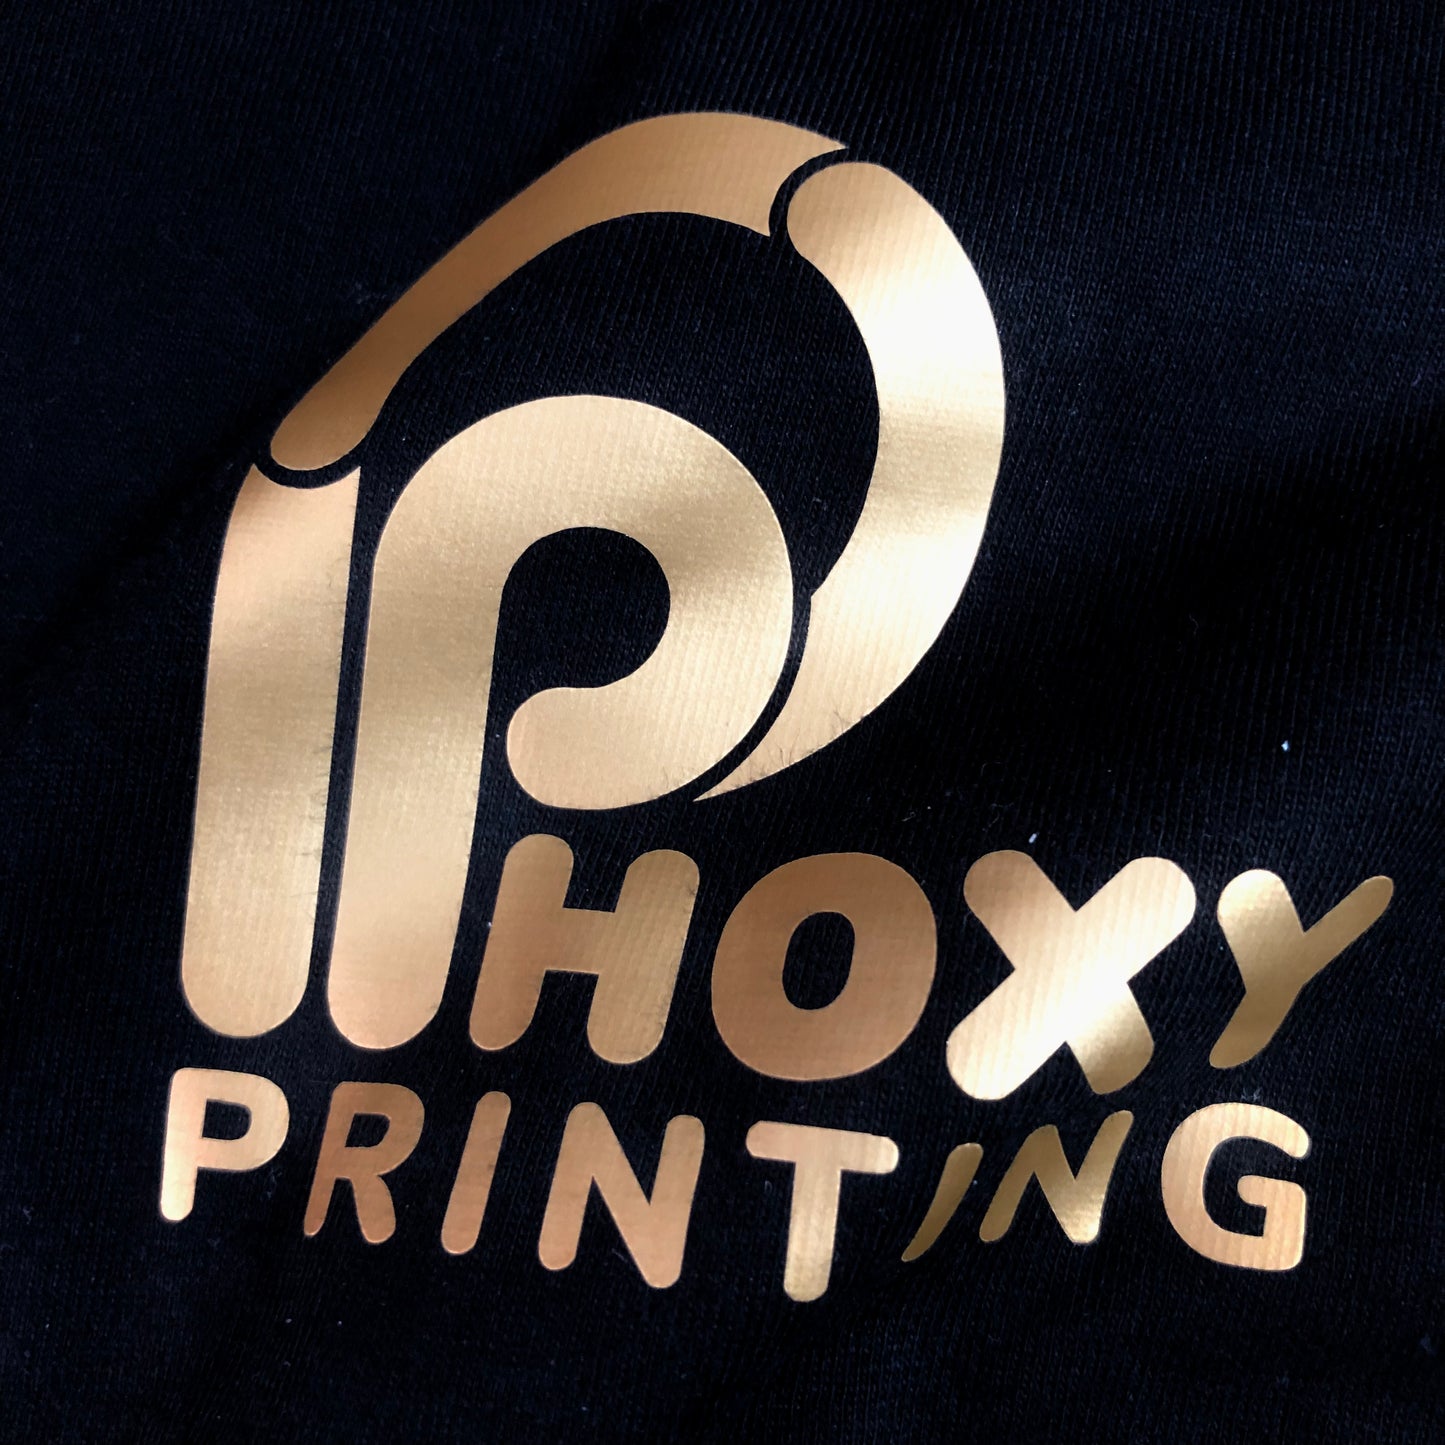 Custom Cut HTV Iron On Transfer To Press Yourself At Home, Personalised Cad Cut Plotter Cutter Vinyl & Iron-on Heat Transfer Vinyl